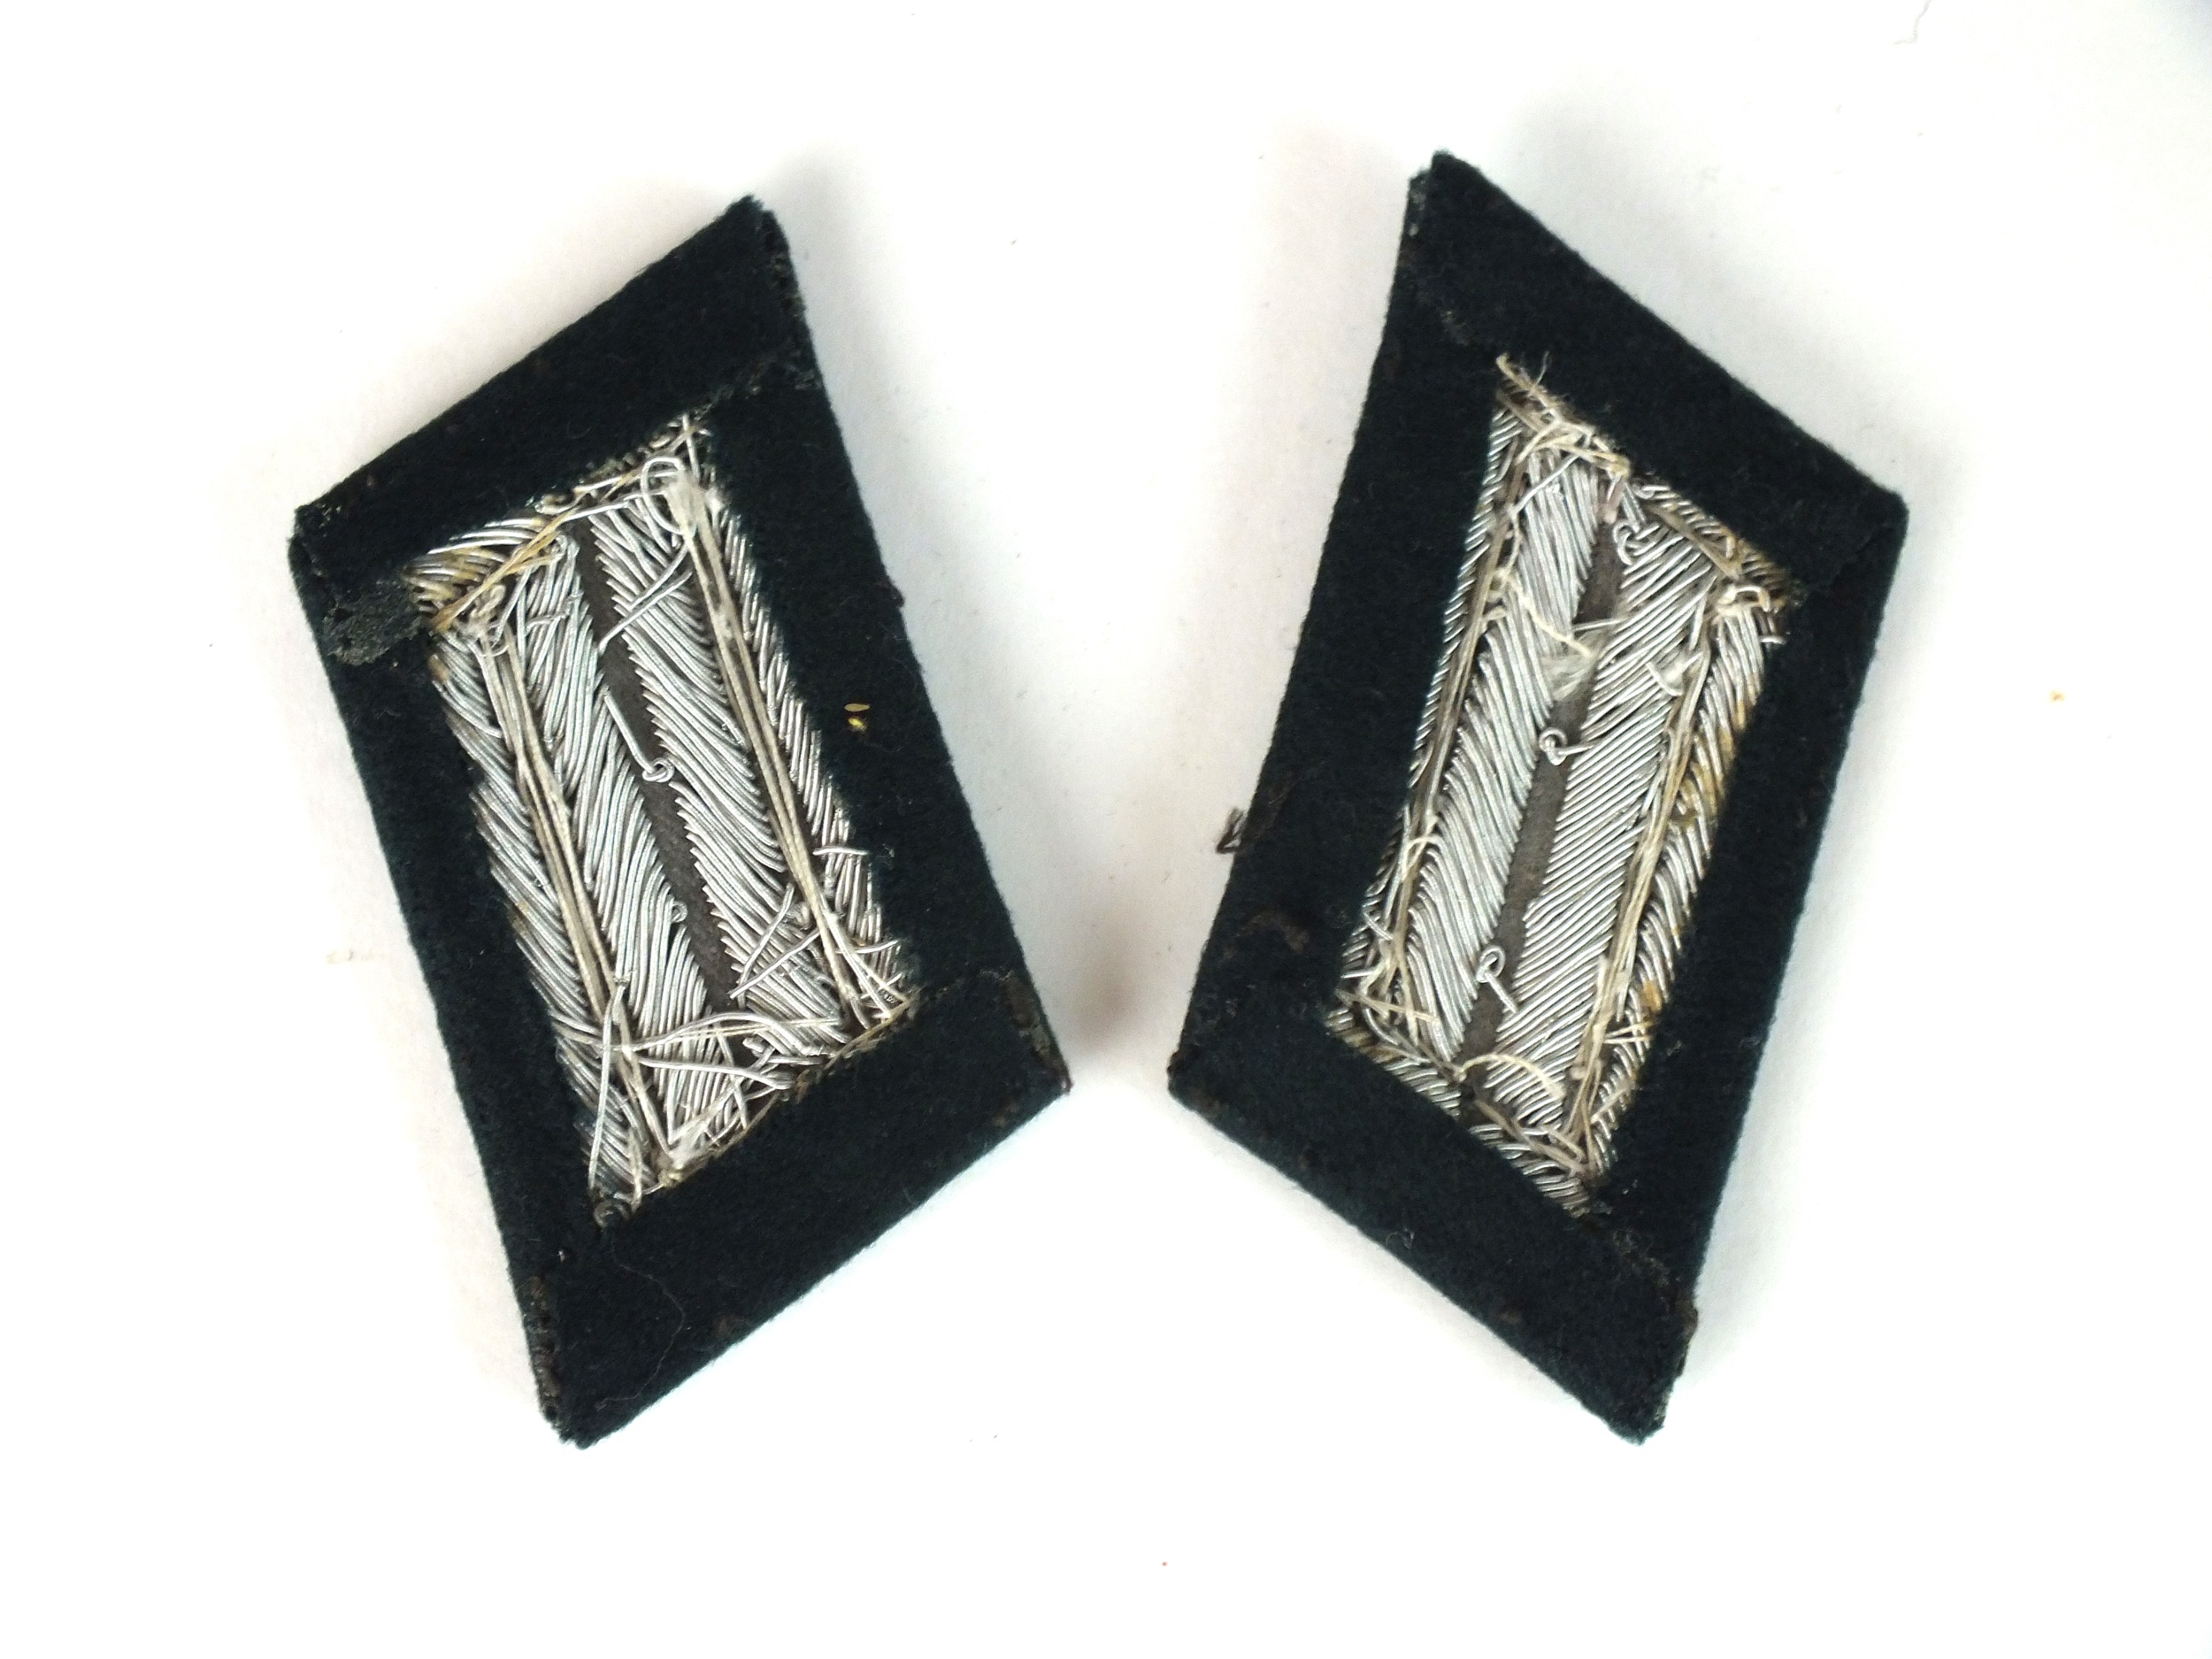 A pair of Third Reich German Heer (Army) Engineer Officer's collar tabs with black piping (2) - Image 2 of 2